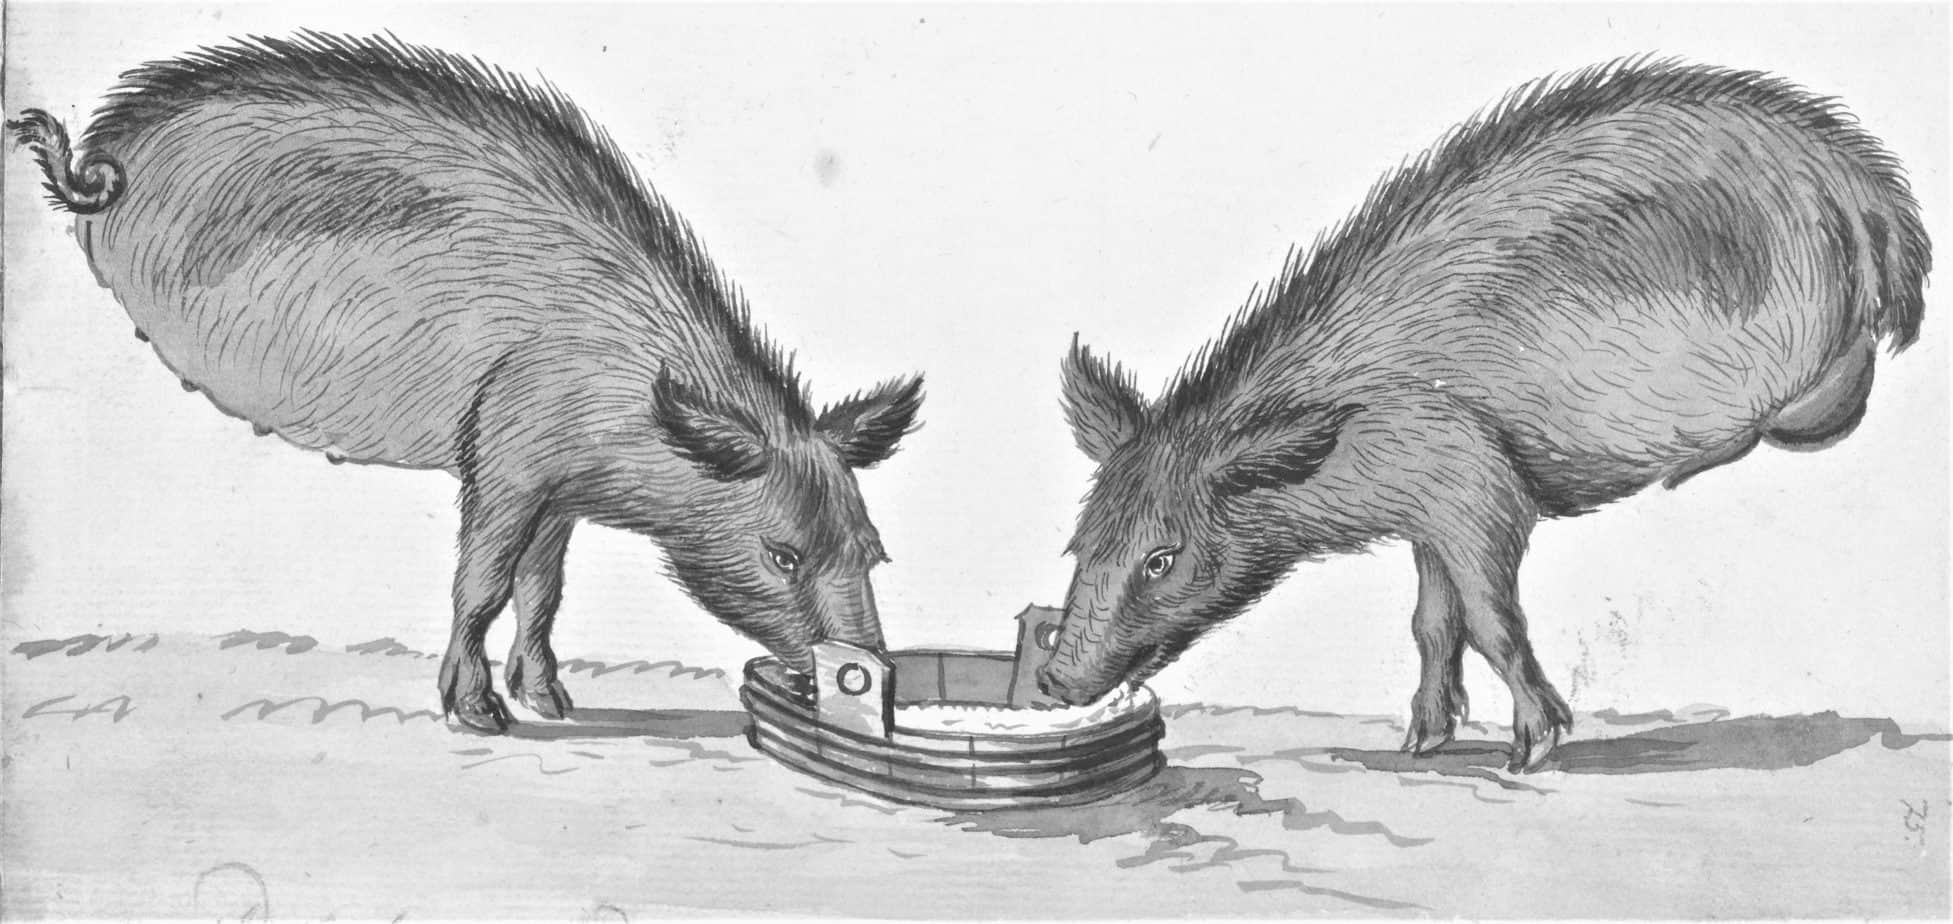 Pigs without hind legs near trough, Jan Brandes, 1785